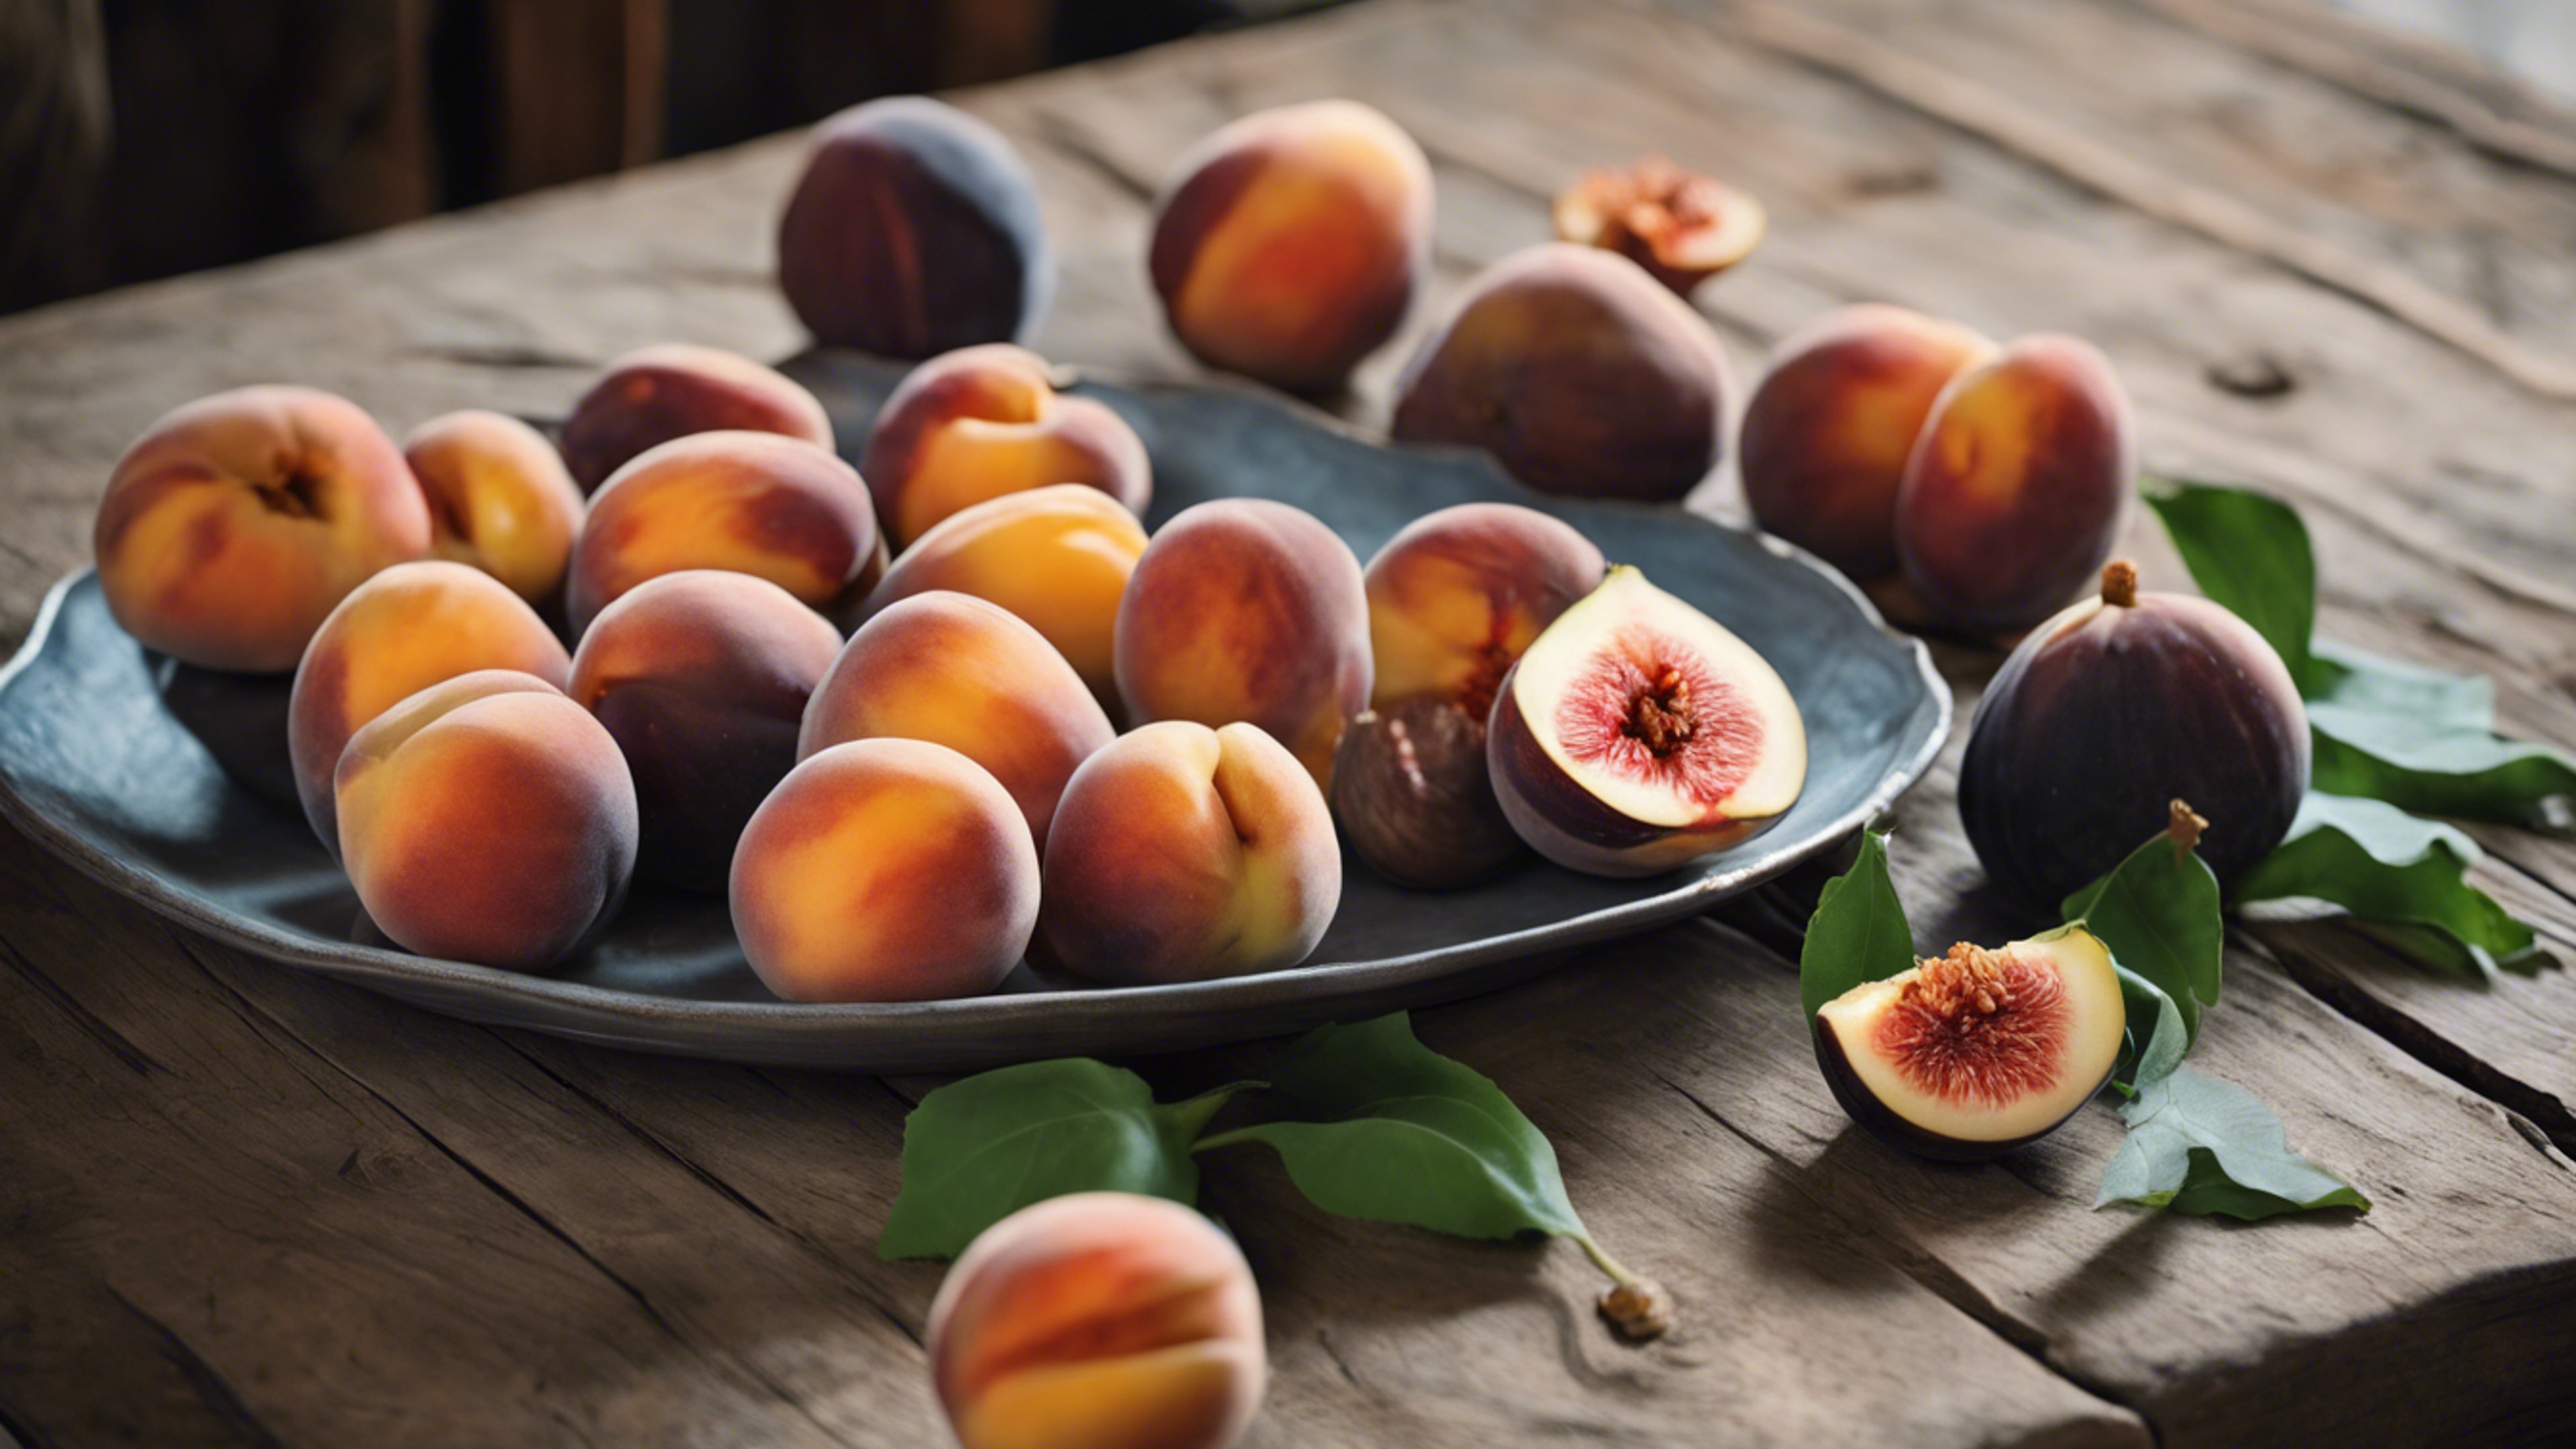 Still life of peaches and figs arranged beautifully on a rustic wooden table. Wallpaper[c31d3ce6096543dcac89]